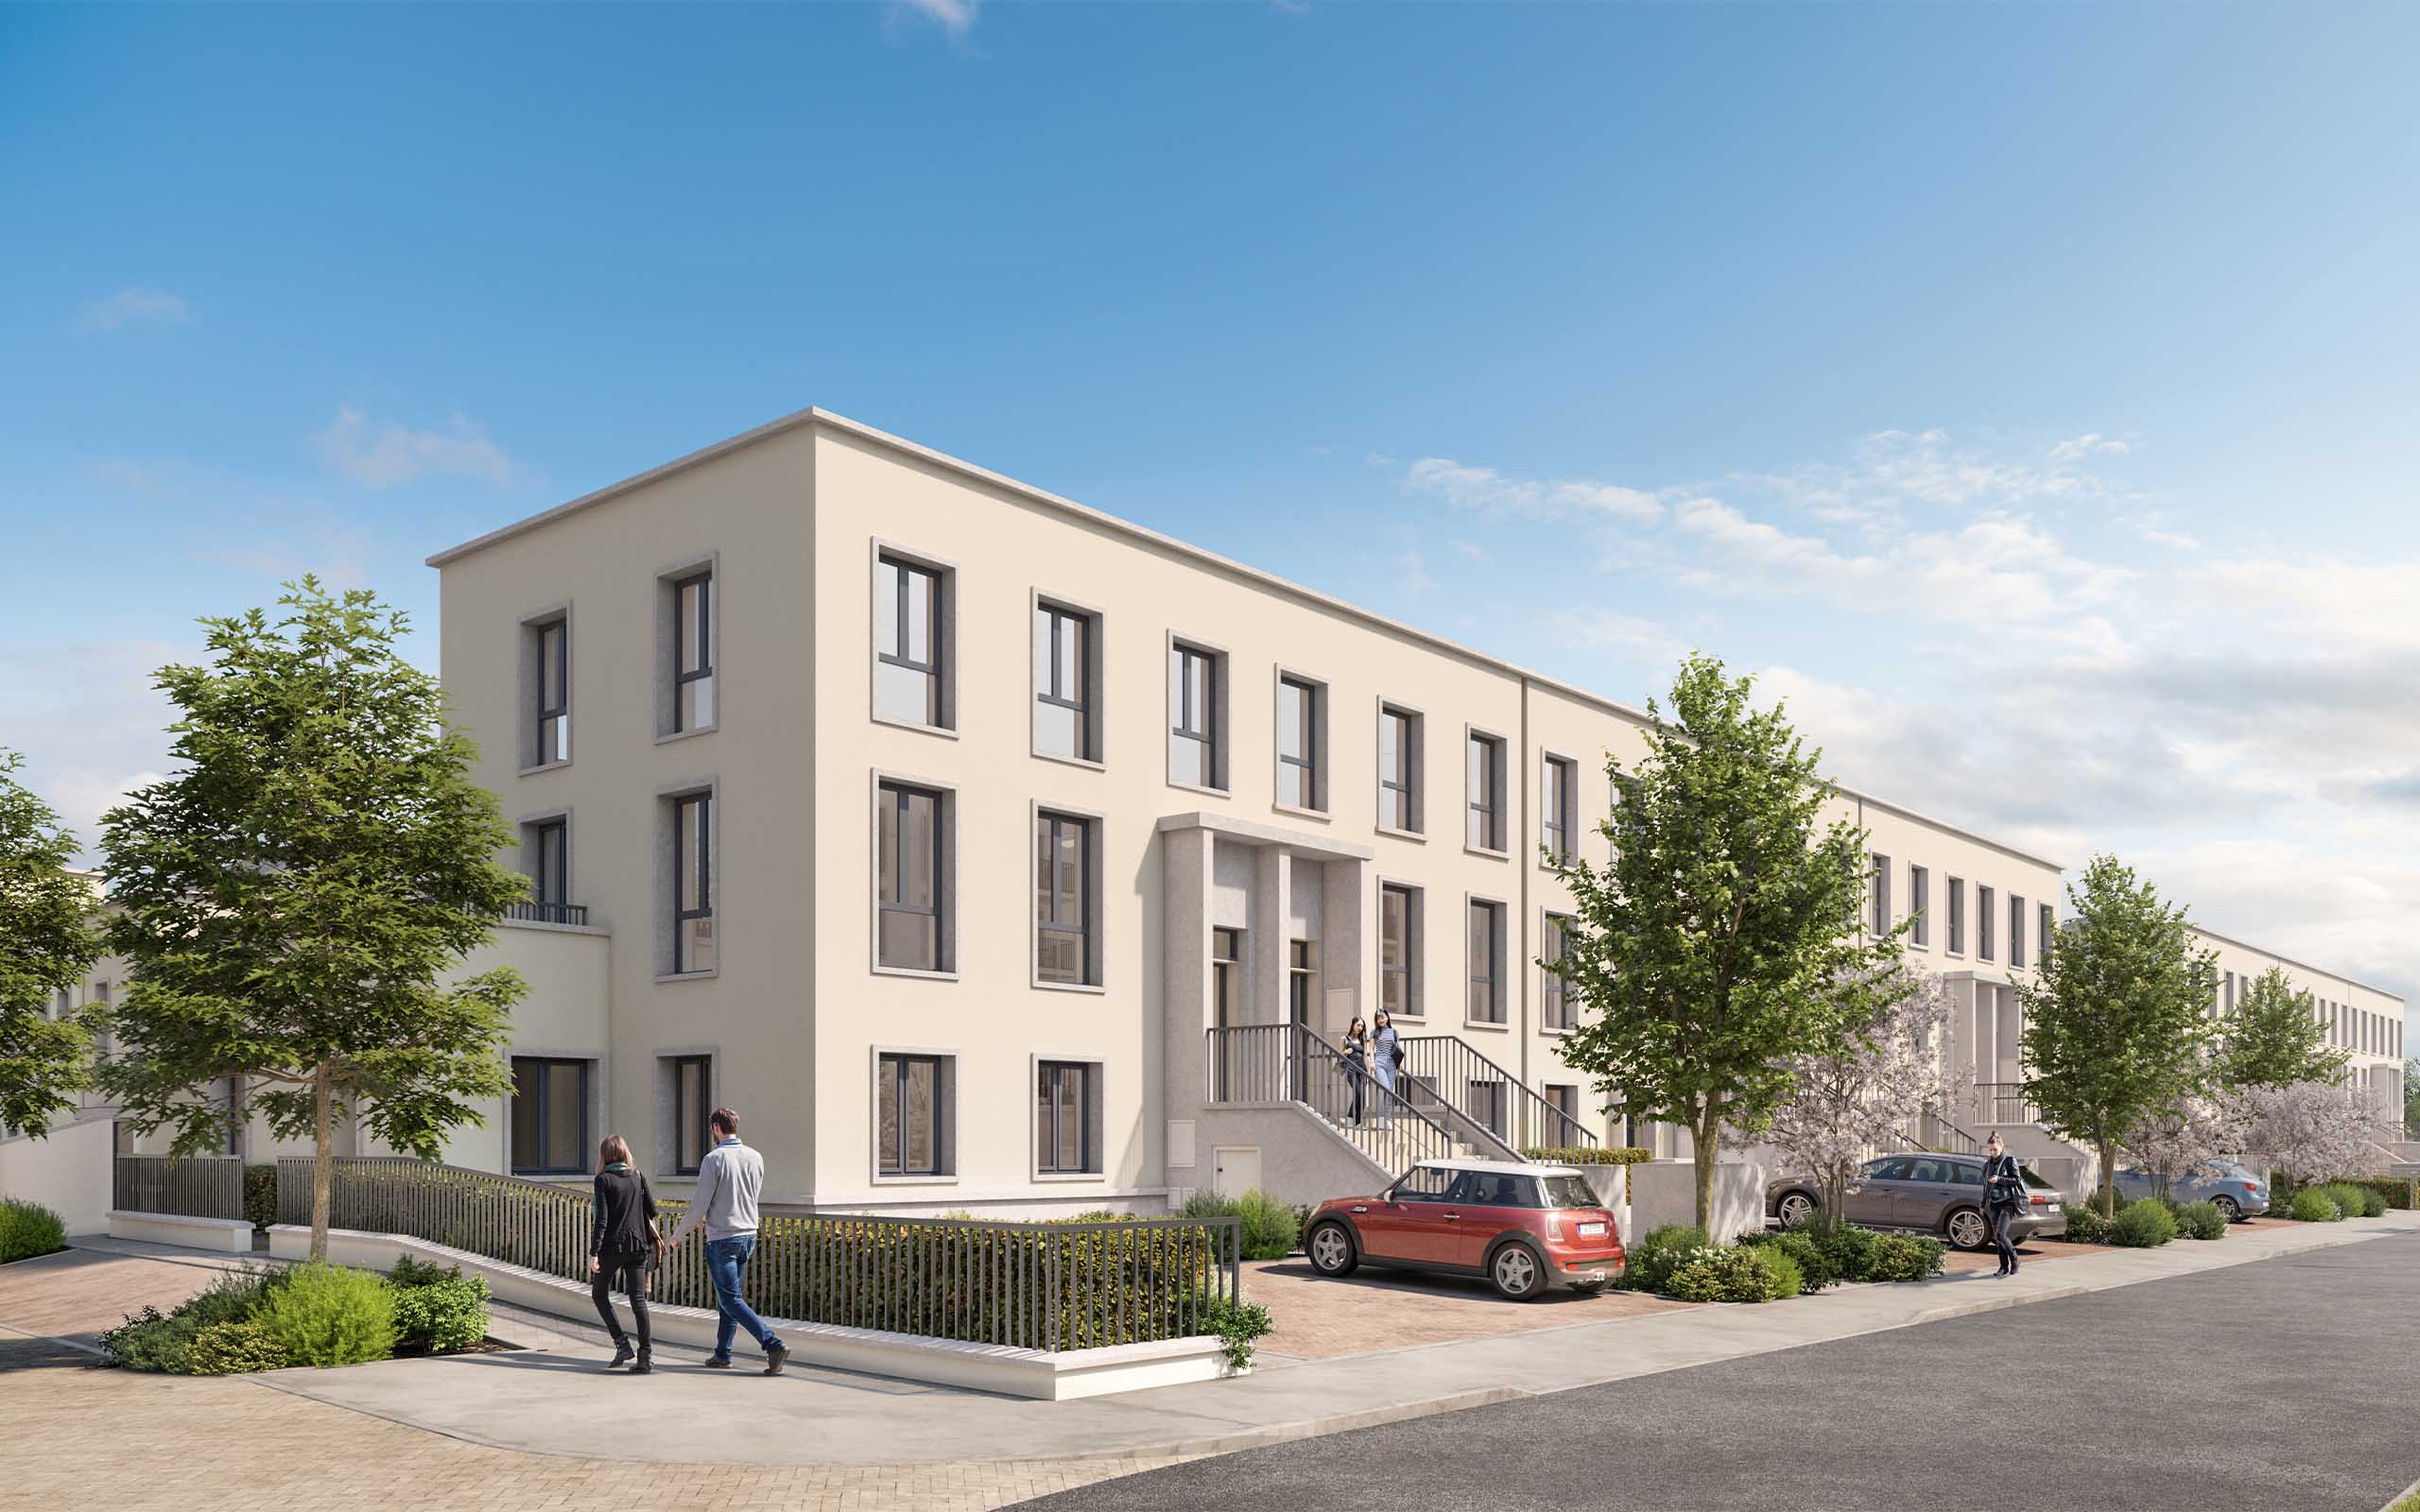 Architectural CGI of Coastal Quarter Housing Development at Bray, Dublin and Wicklow, Co Wicklow.